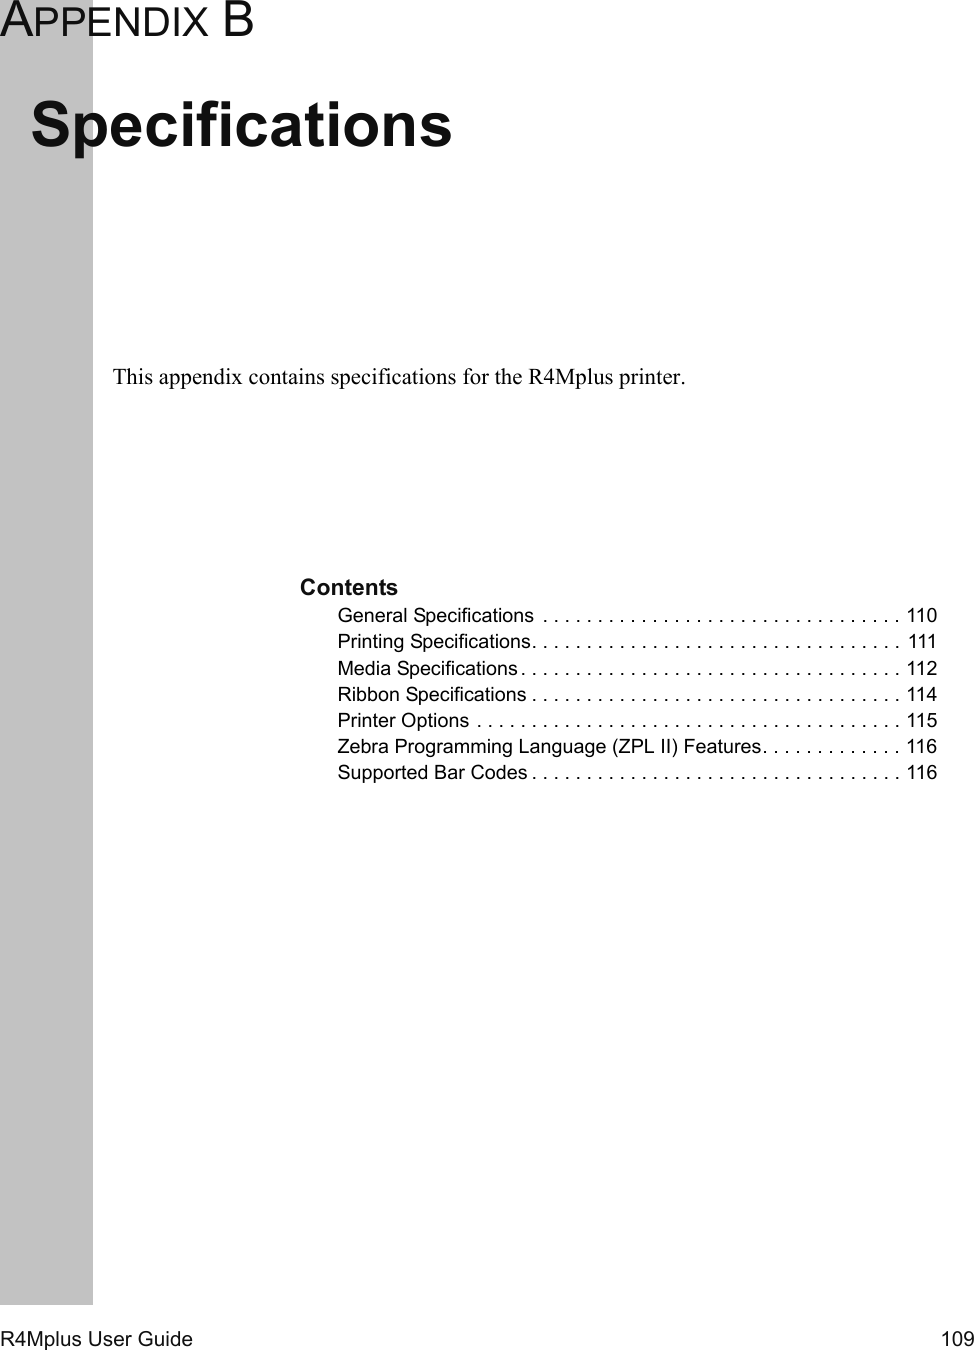 R4Mplus User Guide  109APPENDIX BSpecificationsThis appendix contains specifications for the R4Mplus printer.ContentsGeneral Specifications  . . . . . . . . . . . . . . . . . . . . . . . . . . . . . . . . . 110Printing Specifications. . . . . . . . . . . . . . . . . . . . . . . . . . . . . . . . . .  111Media Specifications . . . . . . . . . . . . . . . . . . . . . . . . . . . . . . . . . . . 112Ribbon Specifications . . . . . . . . . . . . . . . . . . . . . . . . . . . . . . . . . . 114Printer Options . . . . . . . . . . . . . . . . . . . . . . . . . . . . . . . . . . . . . . . 115Zebra Programming Language (ZPL II) Features. . . . . . . . . . . . . 116Supported Bar Codes . . . . . . . . . . . . . . . . . . . . . . . . . . . . . . . . . . 116